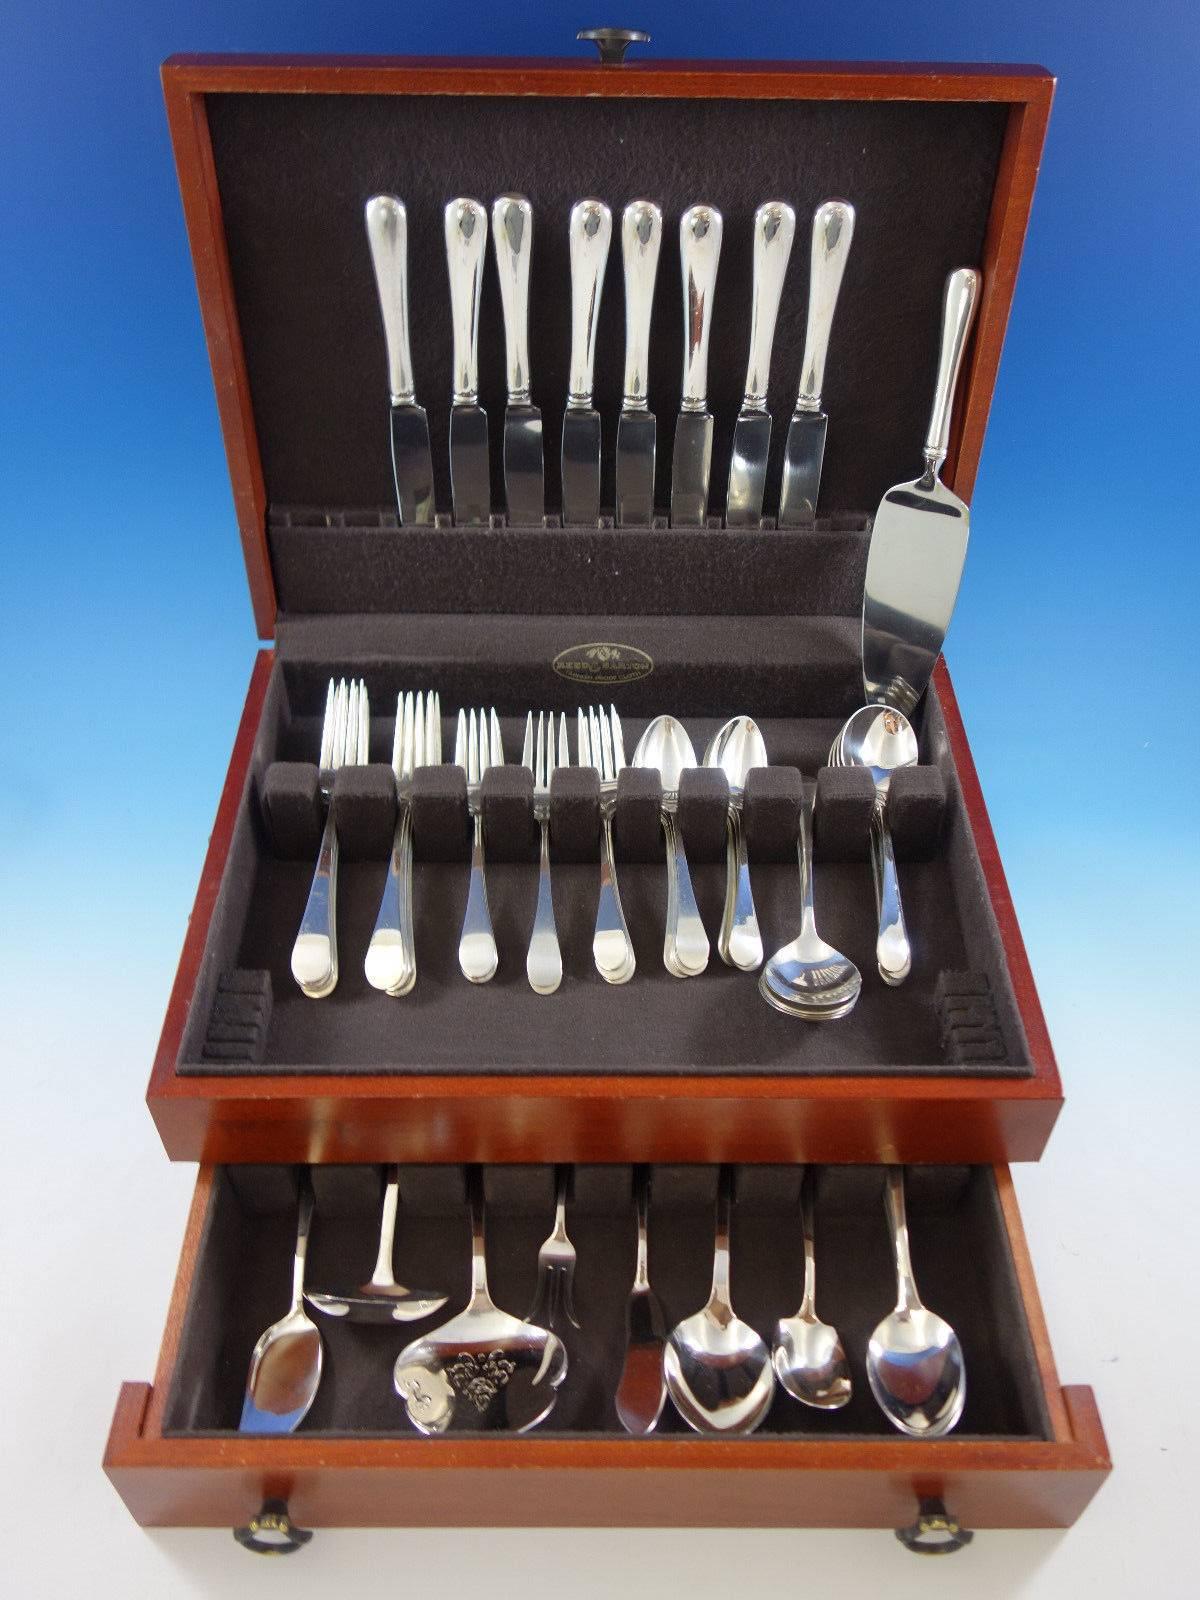 Hannah hull by Tuttle sterling silver flatware set - 56 pieces. This set includes: eight knives, 8 7/8